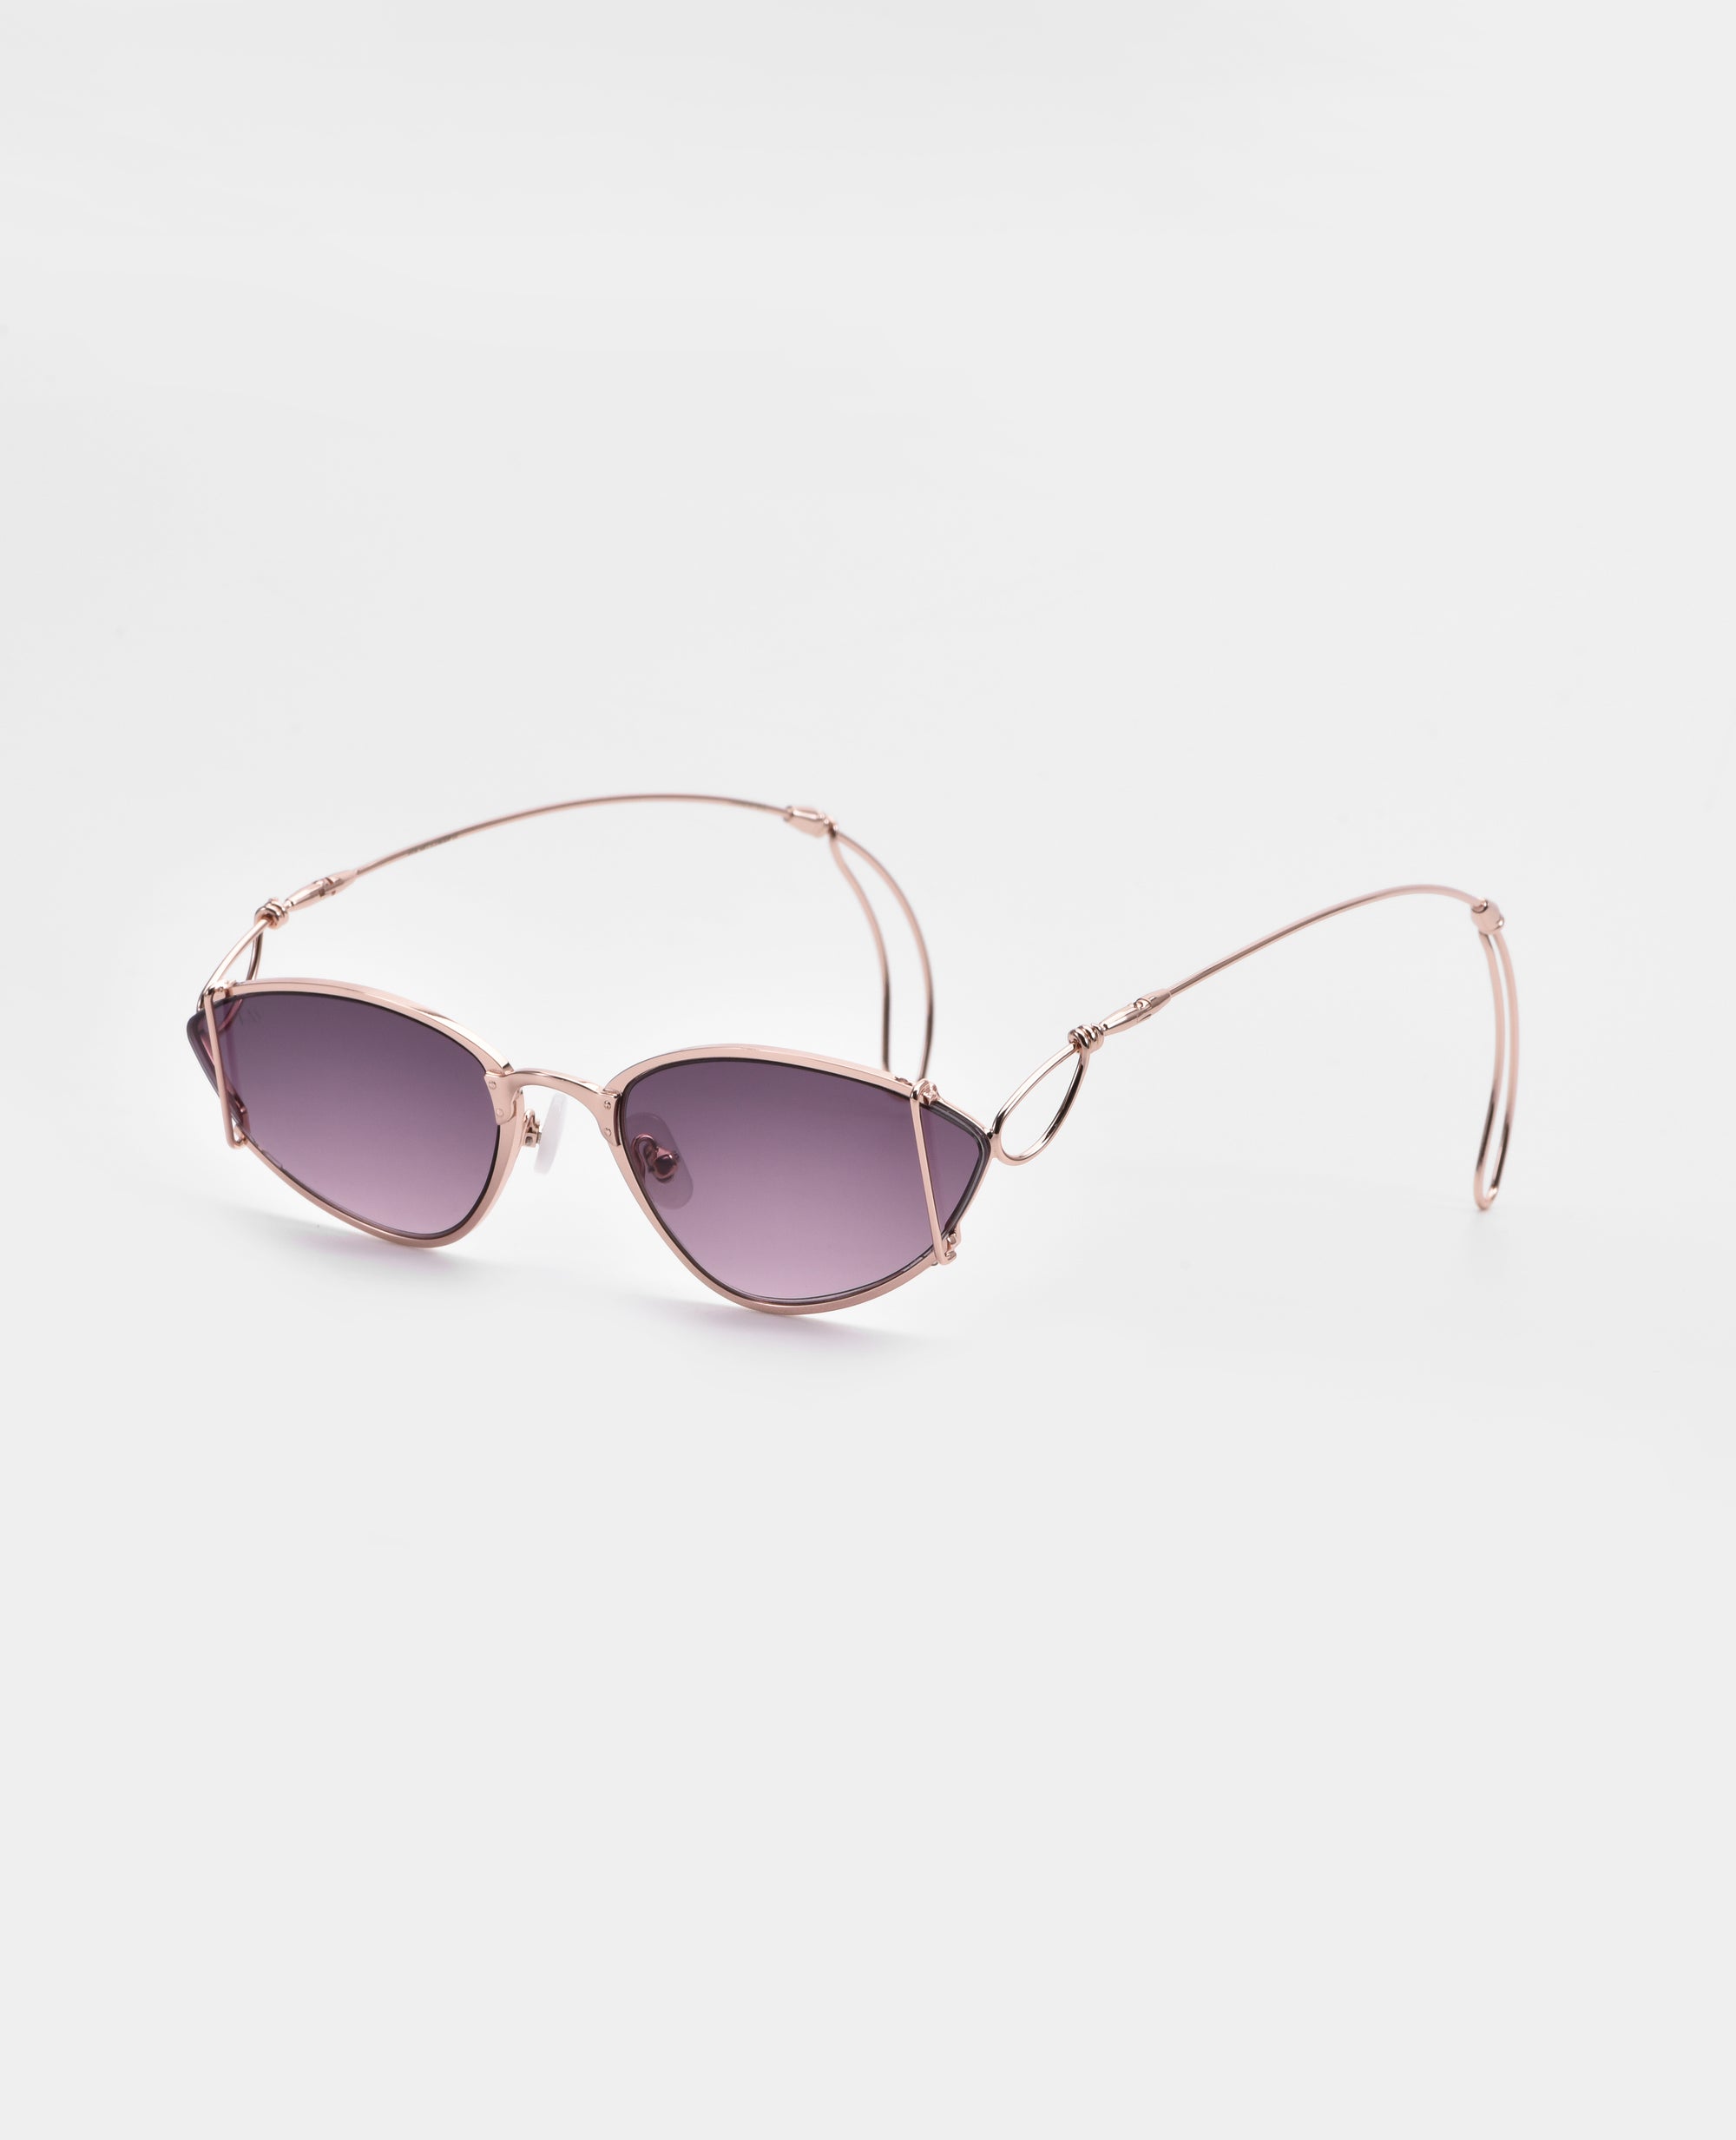 Ornate sunglasses from For Art&#39;s Sake® with 18-karat gold-plated rose gold frames and purple-tinted, ultra-lightweight nylon lenses. The design features a unique, minimalist wire temple and nose bridge, adding a modern and stylish touch. Offers 100% UVA &amp; UVB protection against harmful rays.